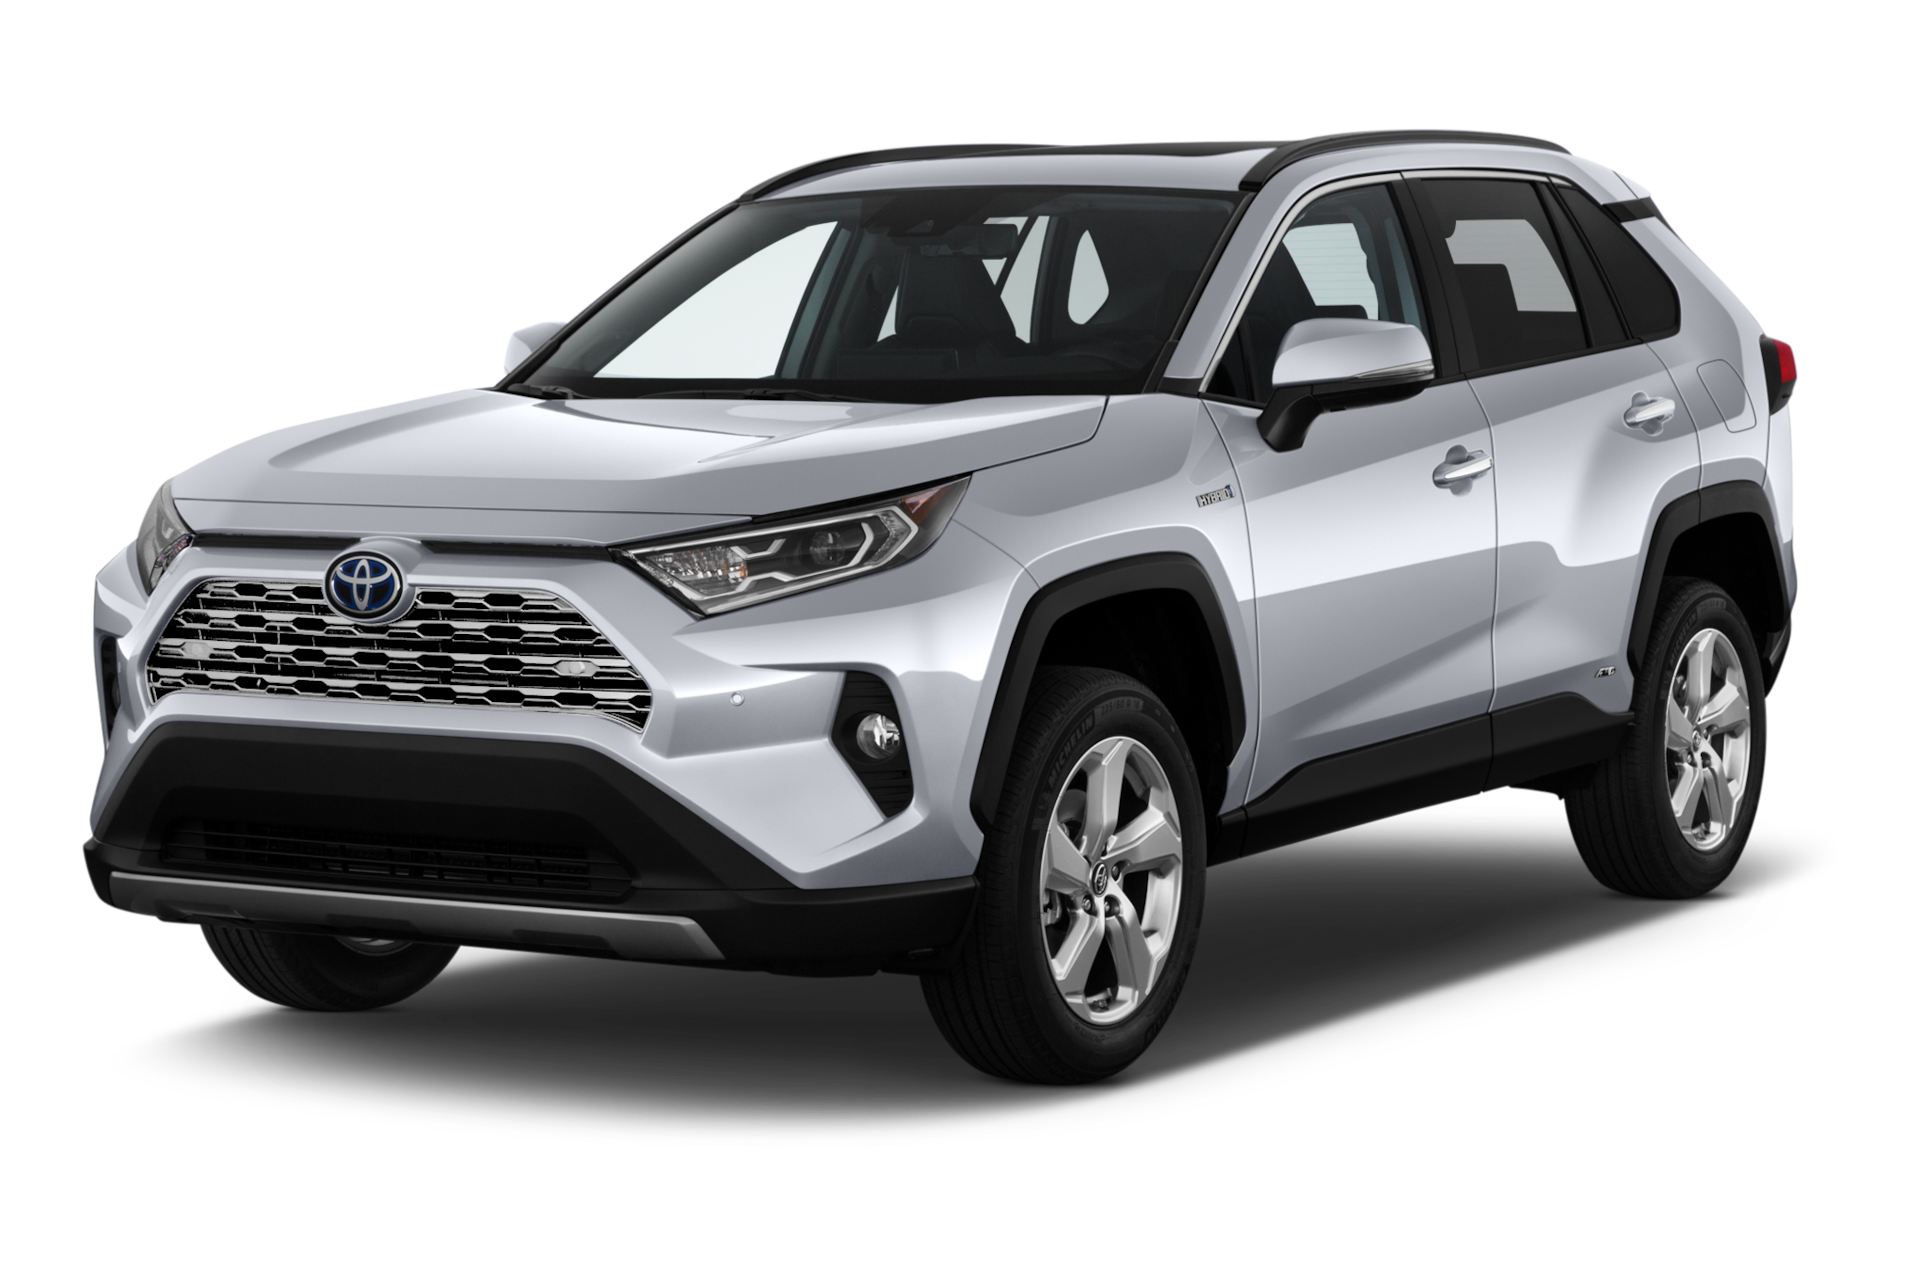 2020 Toyota RAV4 Hybrid Prices, Reviews, and Photos - MotorTrend